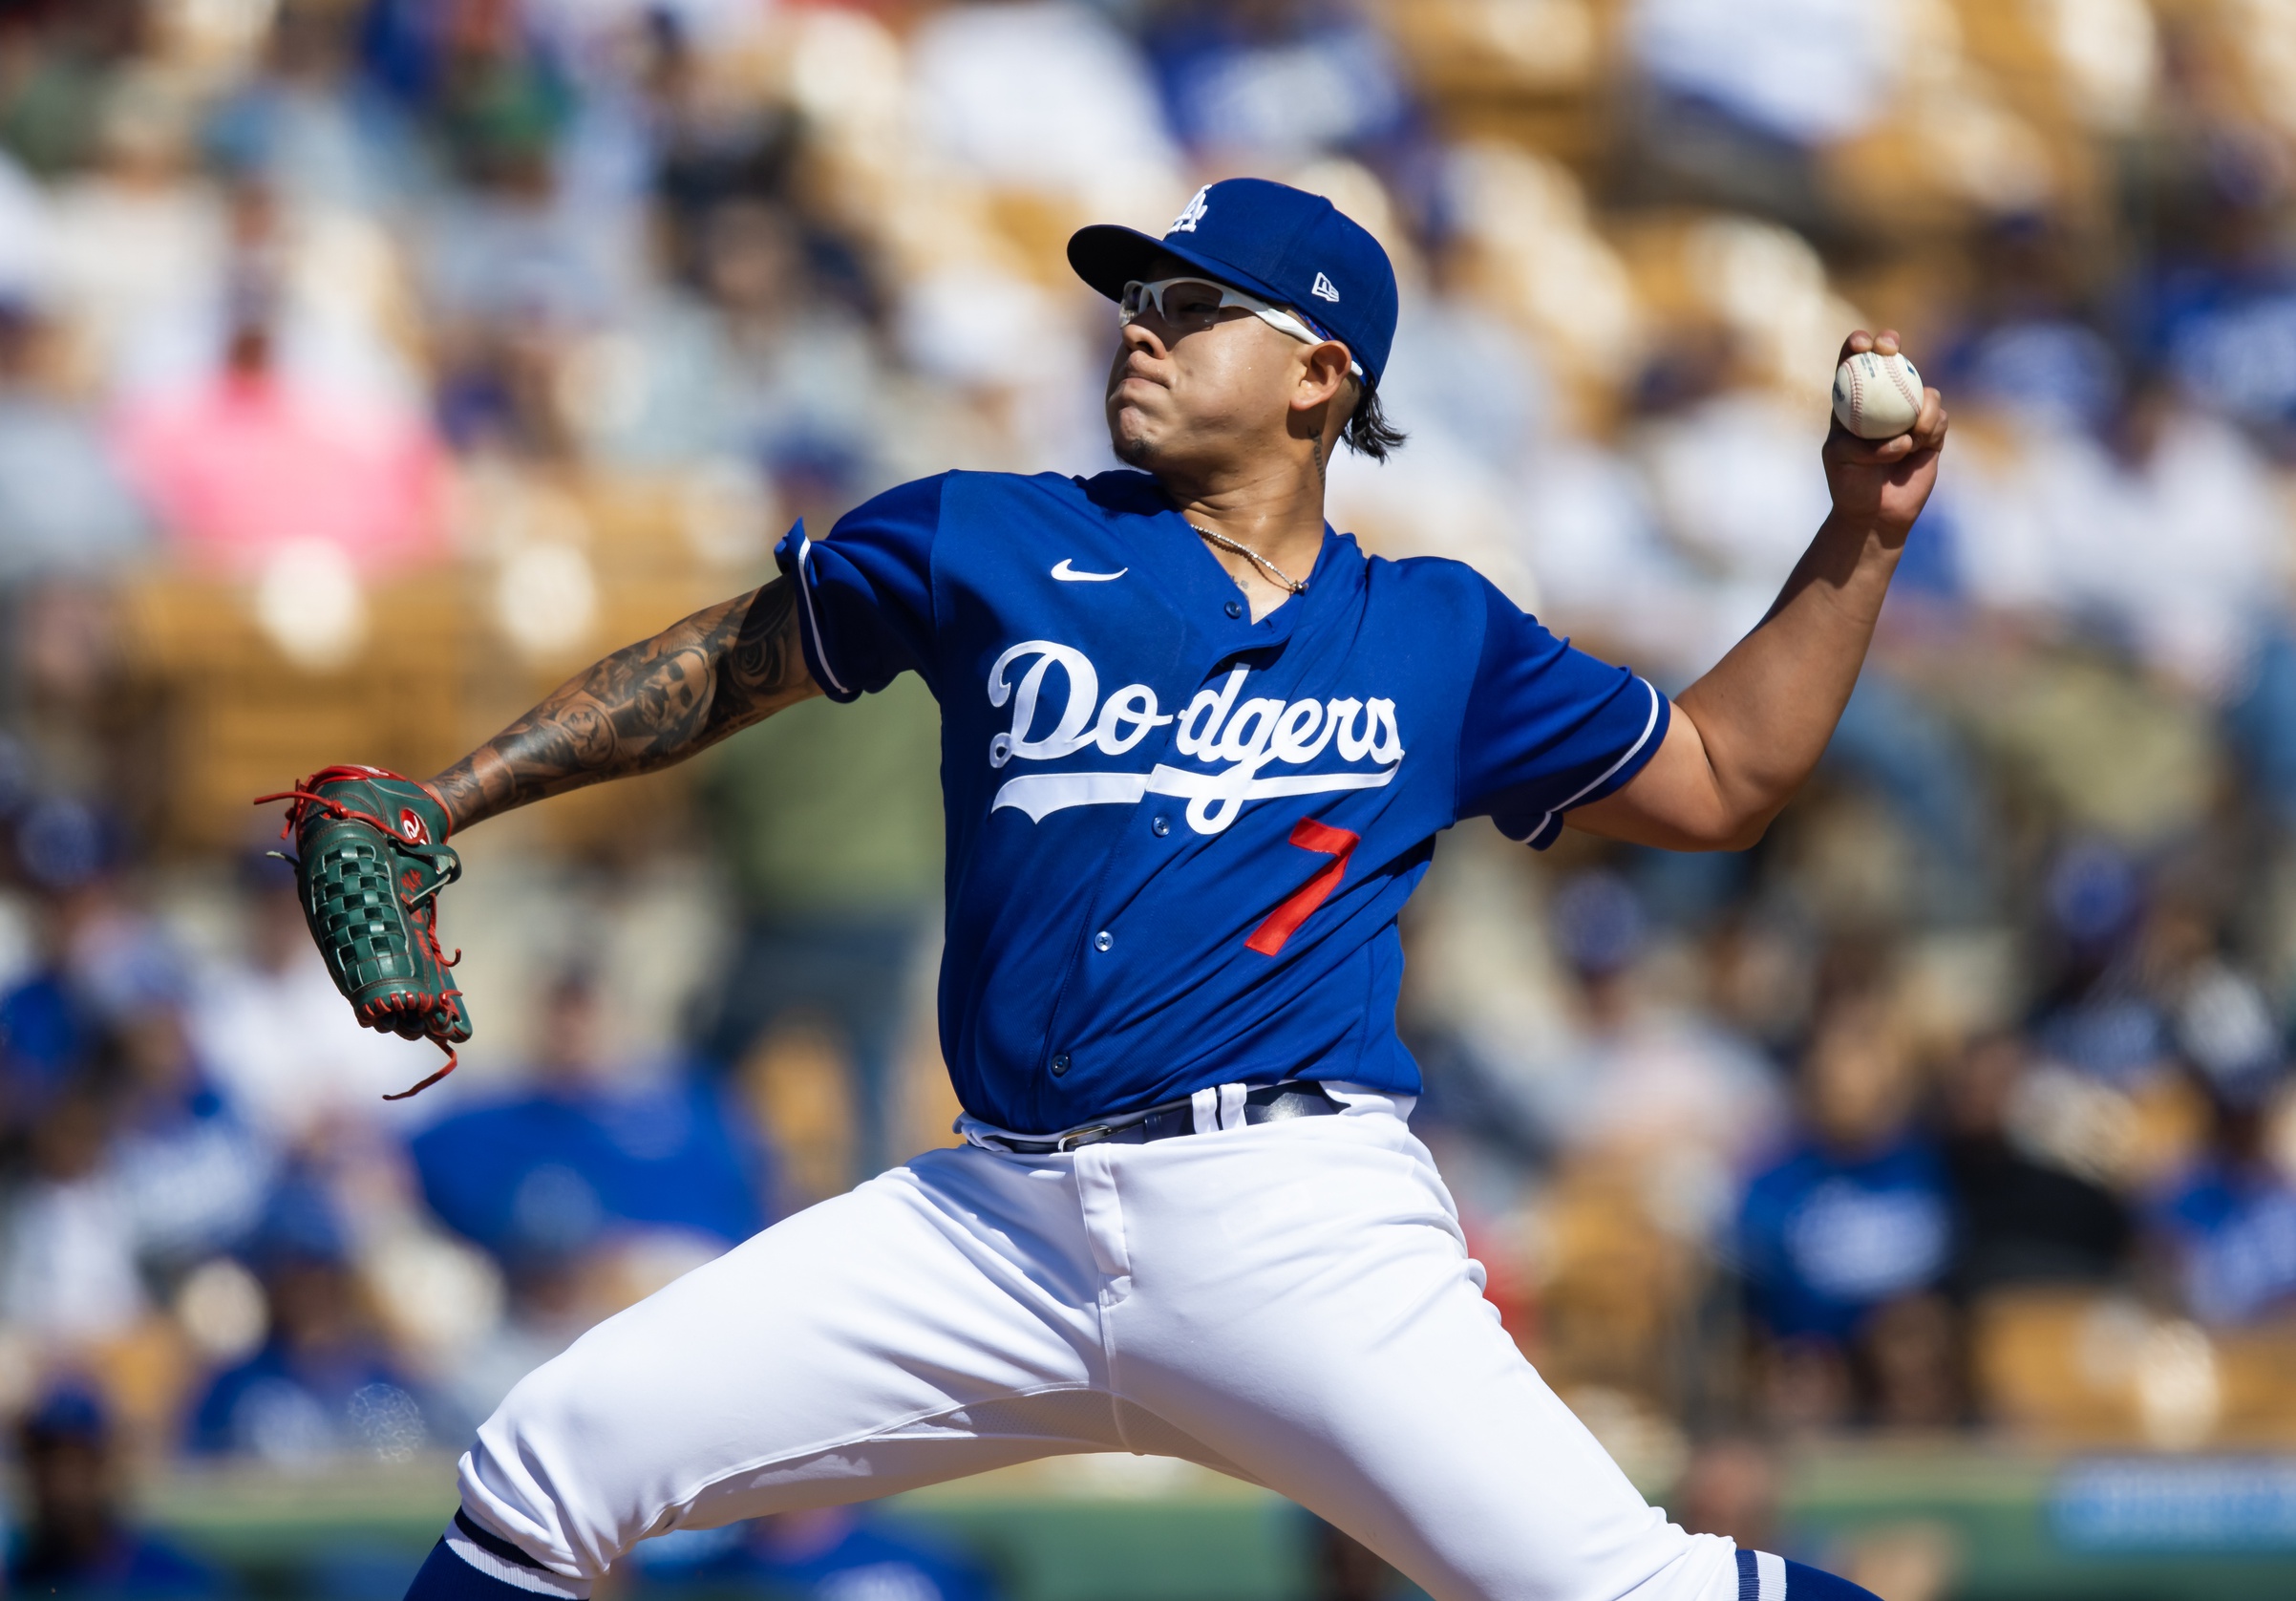 Dodgers Notes: Starting Rotation Set, Tony Gonsolin’s Return, Opening Day Roster Rumors, Minor League Announcements & More